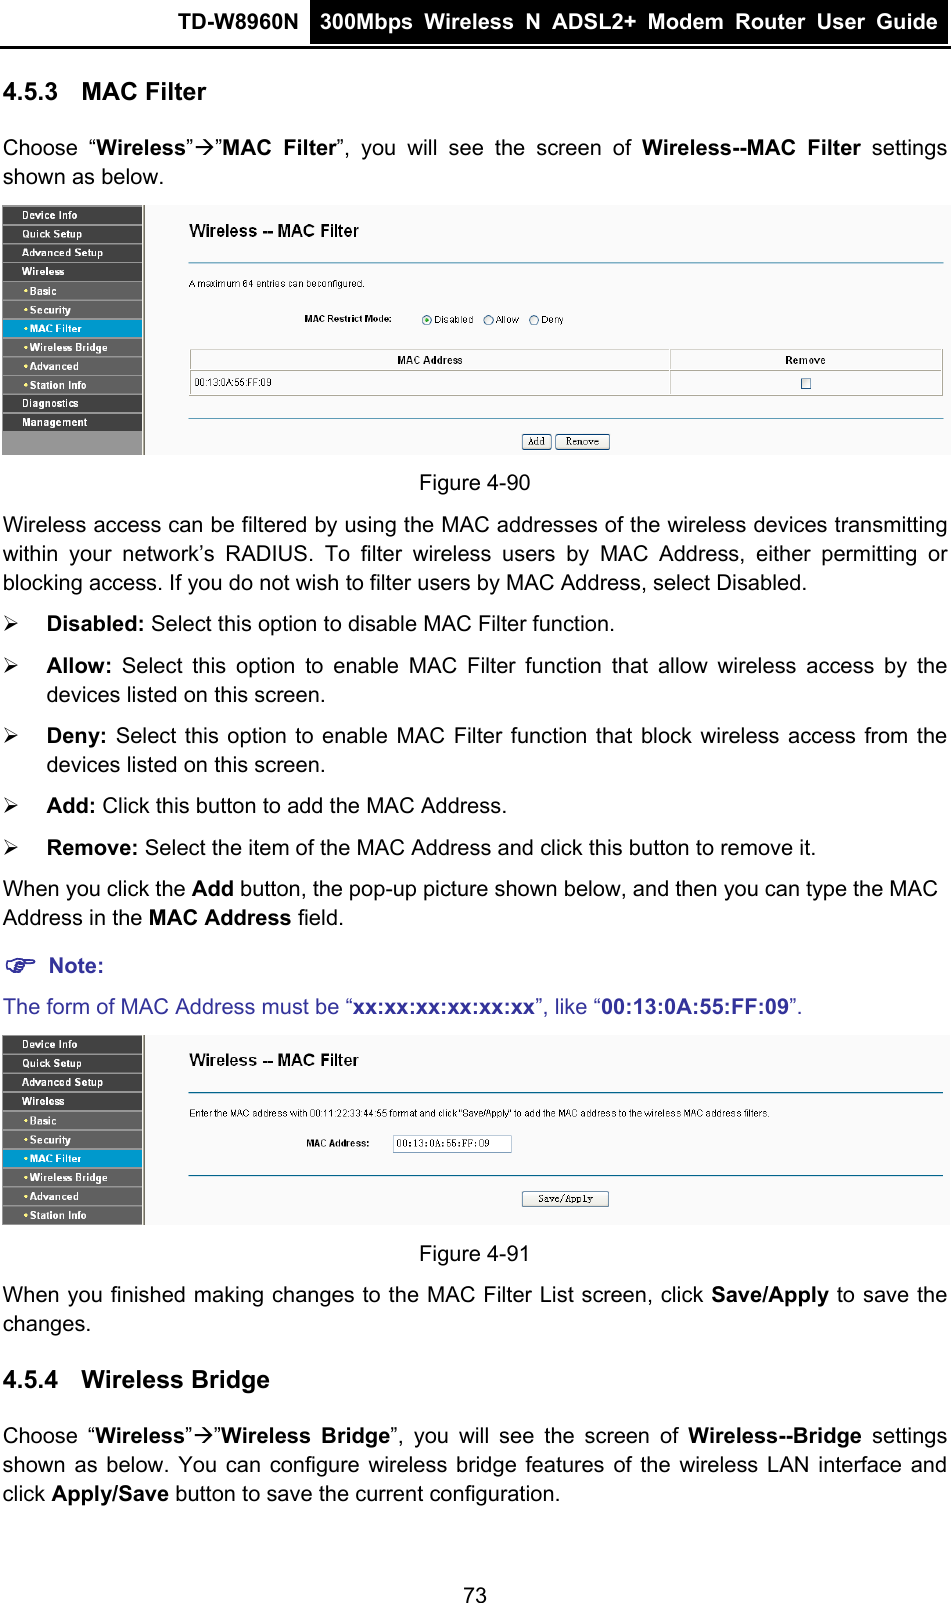 TD-W8960N  300Mbps Wireless N ADSL2+ Modem Router User Guide  4.5.3  MAC Filter Choose “Wireless””MAC Filter”, you will see the screen of Wireless--MAC Filter settings shown as below.  Figure 4-90 Wireless access can be filtered by using the MAC addresses of the wireless devices transmitting within your network’s RADIUS. To filter wireless users by MAC Address, either permitting or blocking access. If you do not wish to filter users by MAC Address, select Disabled.  Disabled: Select this option to disable MAC Filter function.  Allow: Select this option to enable MAC Filter function that allow wireless access by the devices listed on this screen.  Deny:  Select this option to enable MAC Filter function that block wireless access from the devices listed on this screen.  Add: Click this button to add the MAC Address.  Remove: Select the item of the MAC Address and click this button to remove it. When you click the Add button, the pop-up picture shown below, and then you can type the MAC Address in the MAC Address field.  Note: The form of MAC Address must be “xx:xx:xx:xx:xx:xx”, like “00:13:0A:55:FF:09”.  Figure 4-91 When you finished making changes to the MAC Filter List screen, click Save/Apply to save the changes. 4.5.4  Wireless Bridge Choose “Wireless””Wireless Bridge”, you will see the screen of Wireless--Bridge settings shown as below. You can configure wireless bridge features of the wireless LAN interface and click Apply/Save button to save the current configuration. 73 